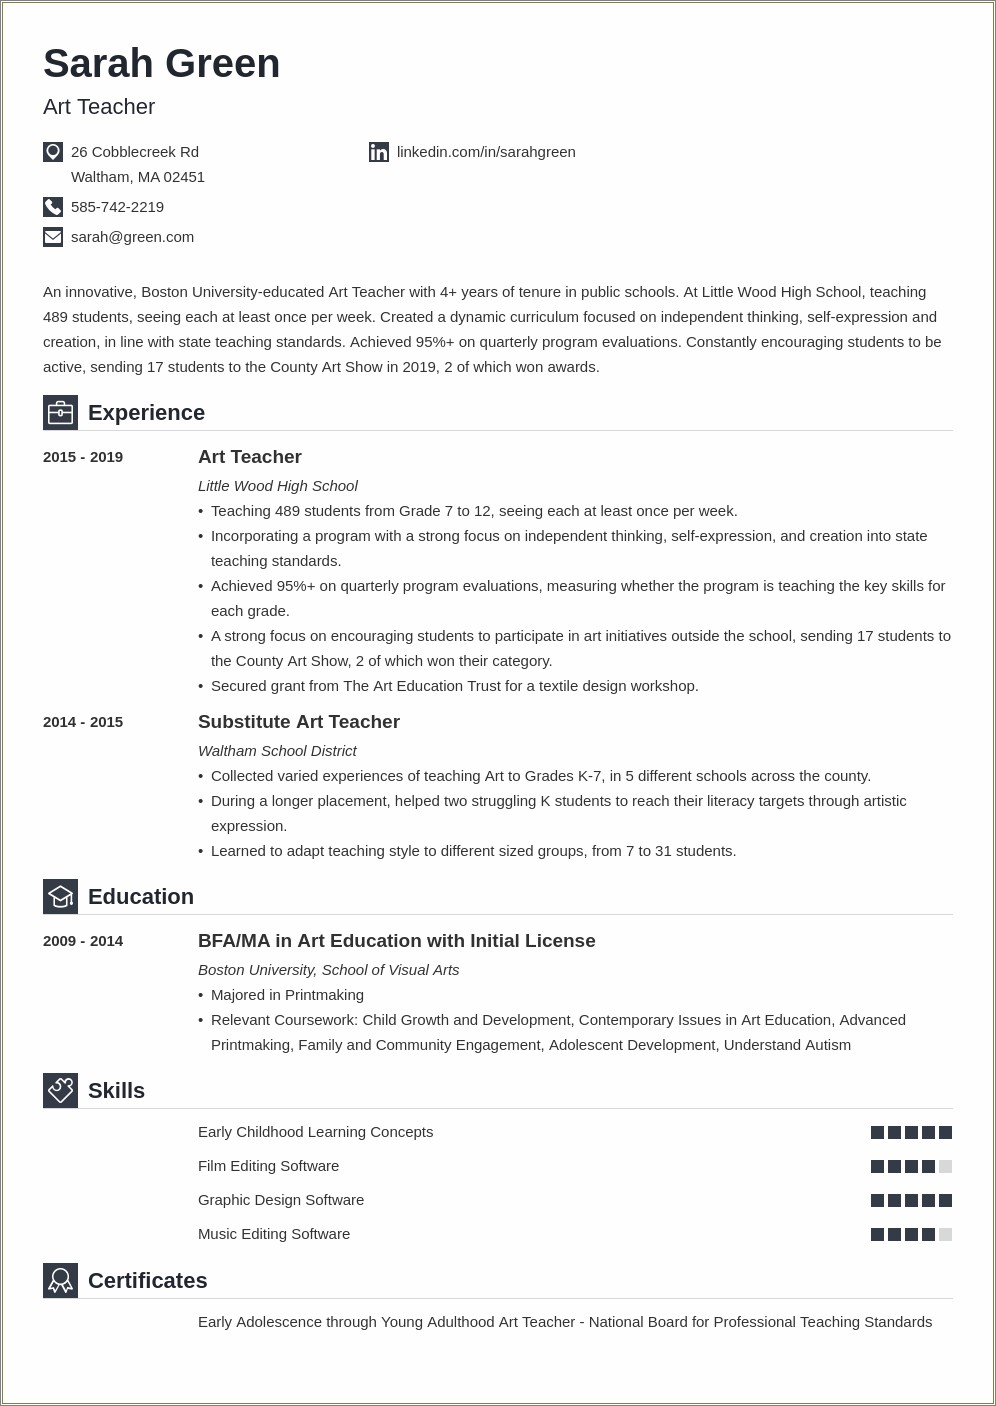 Sample Of A Summary For A Resume Painter